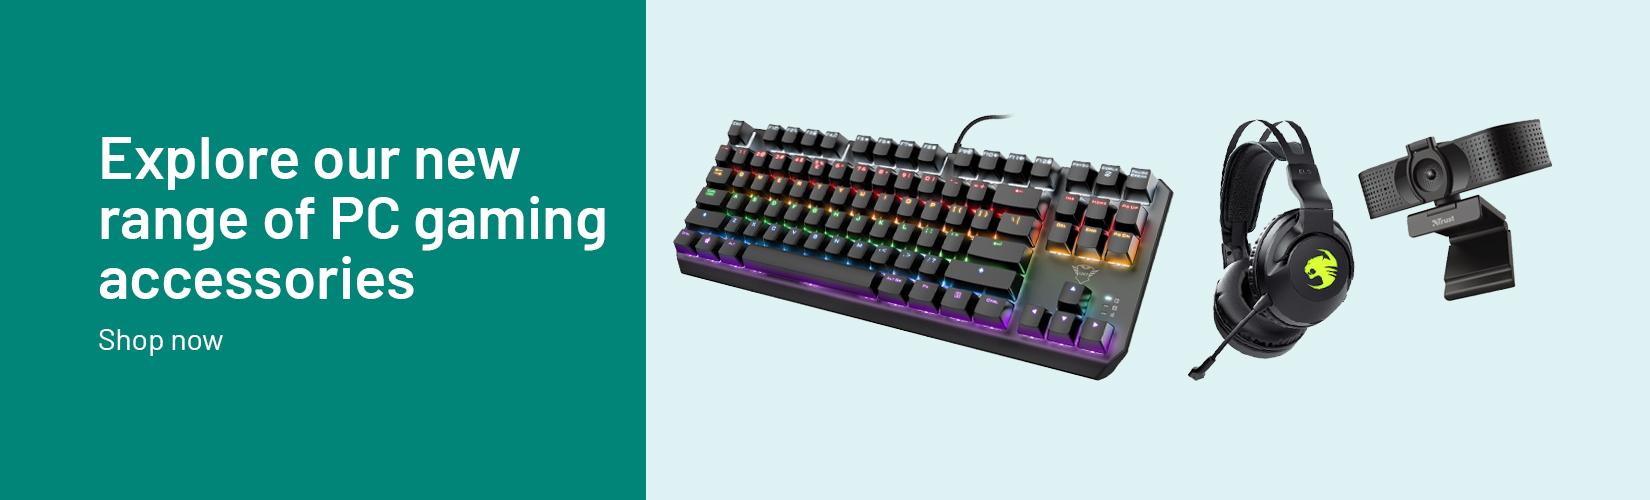 Explore our new range of PC gaming accessories. Shop now.